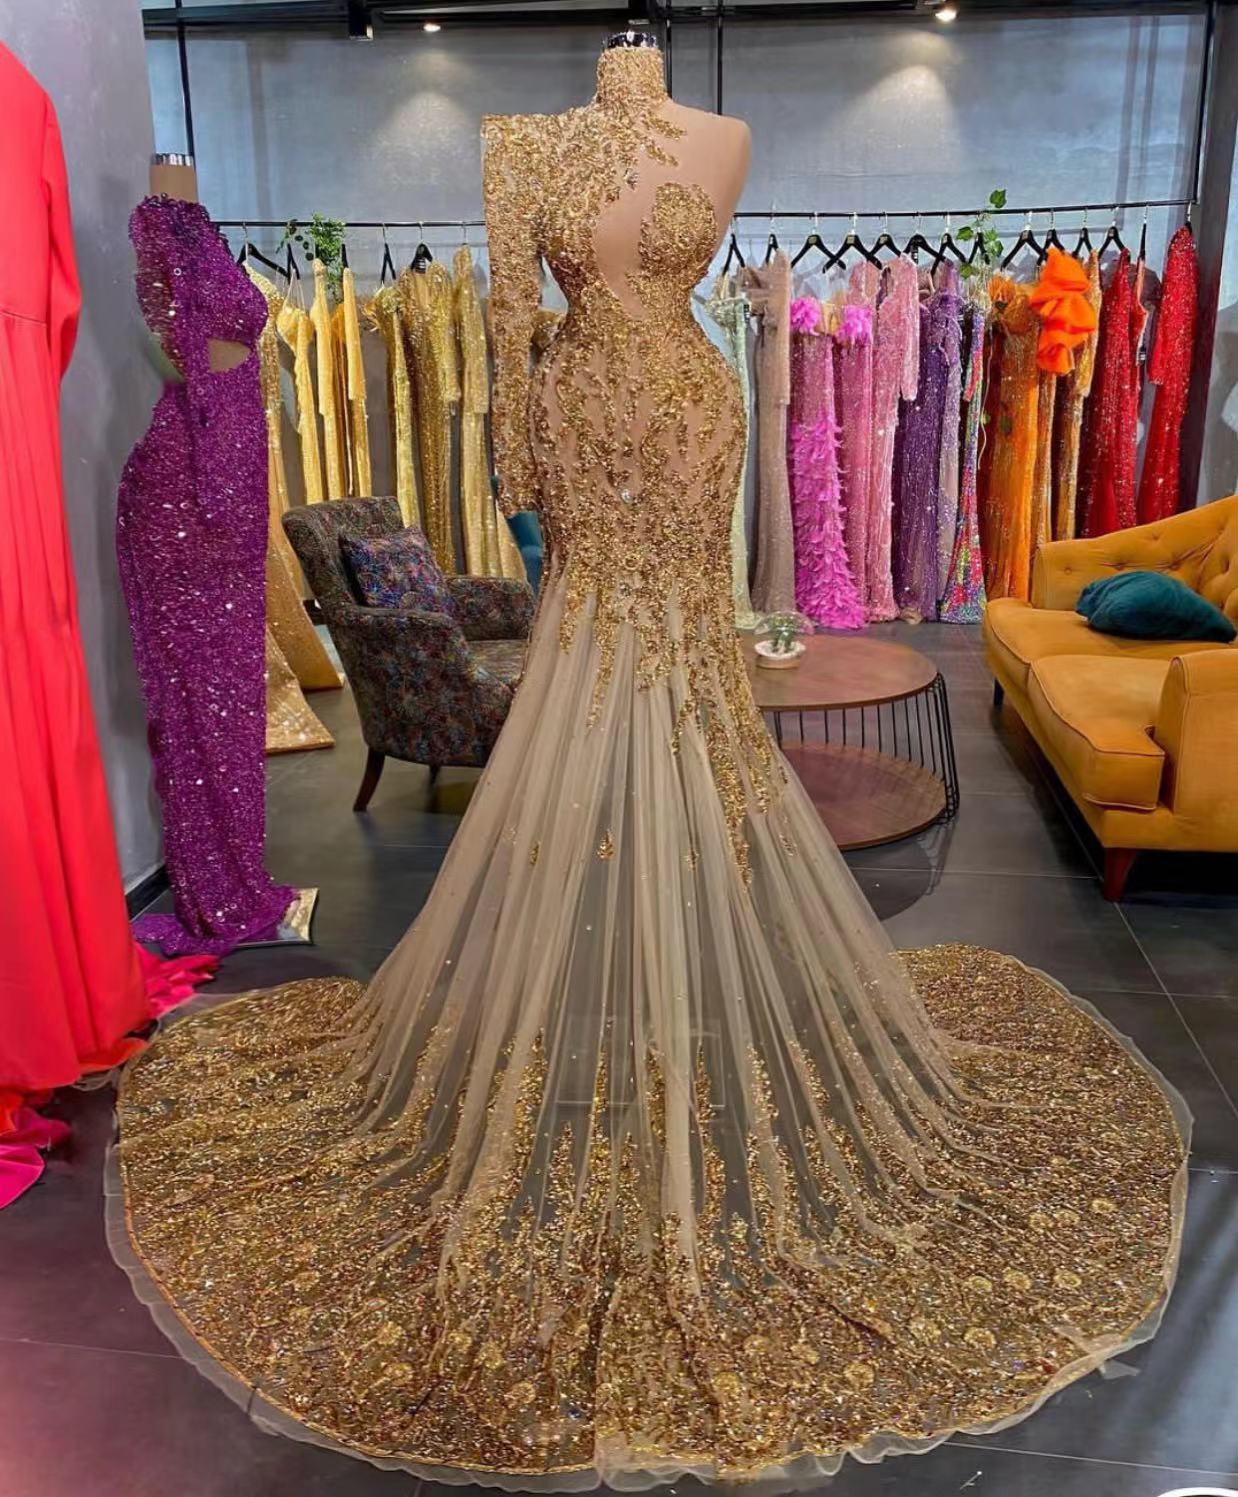 Gold Lace Beaded Evening Dresses, High Neck Evening Dress, Luxury Evening Dresses, Sexy Formal Dresses, Formal Party Dresses, Robe De Soiree